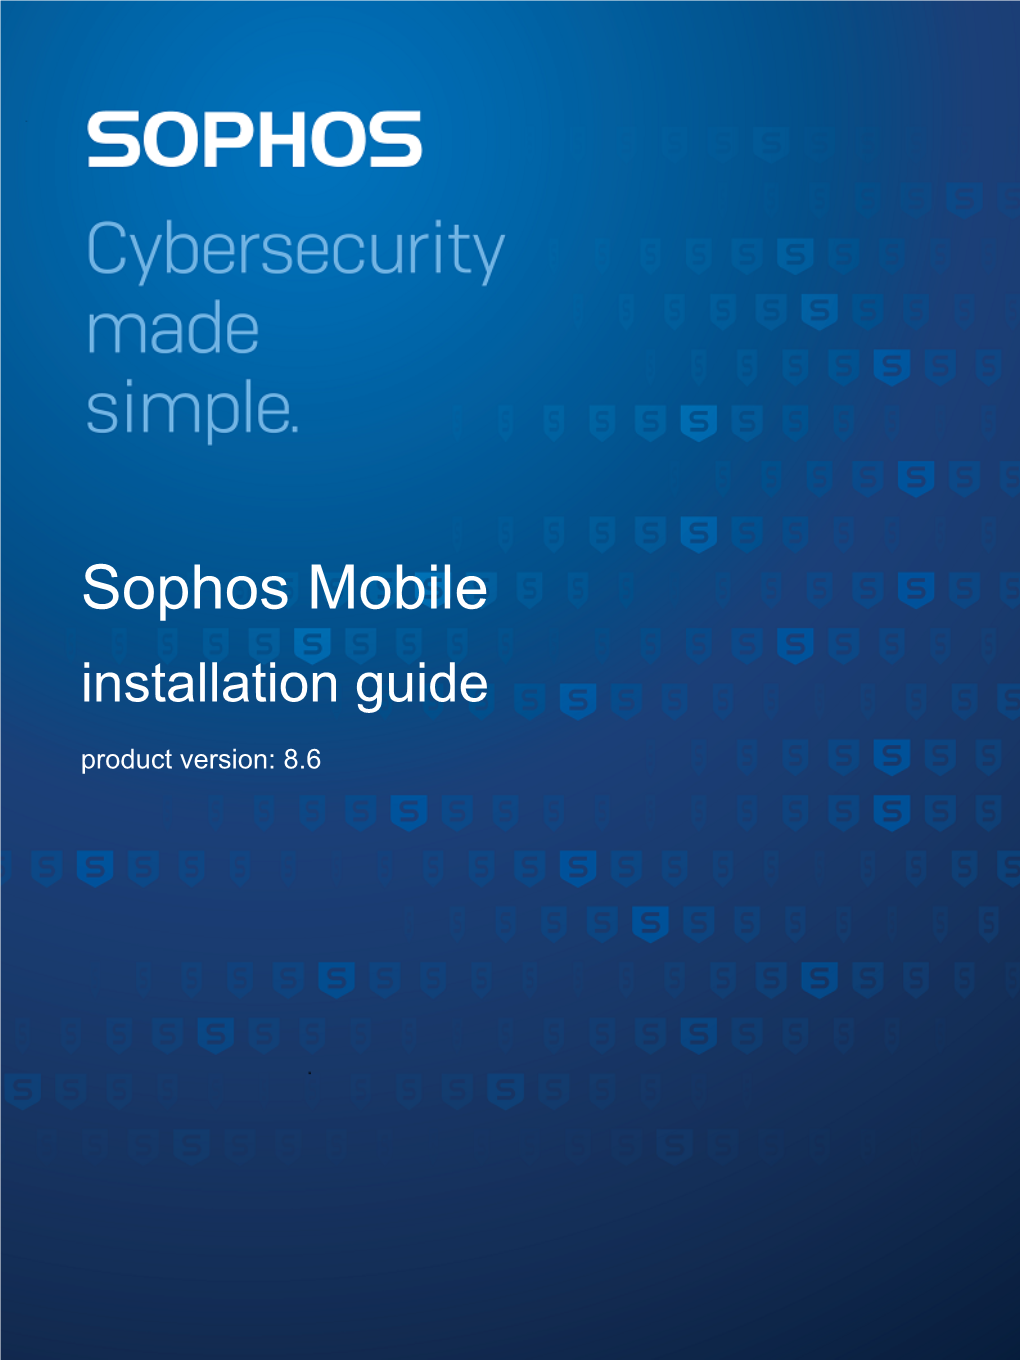 Sophos Mobile Installation Guide Product Version: 8.6 Contents About This Guide